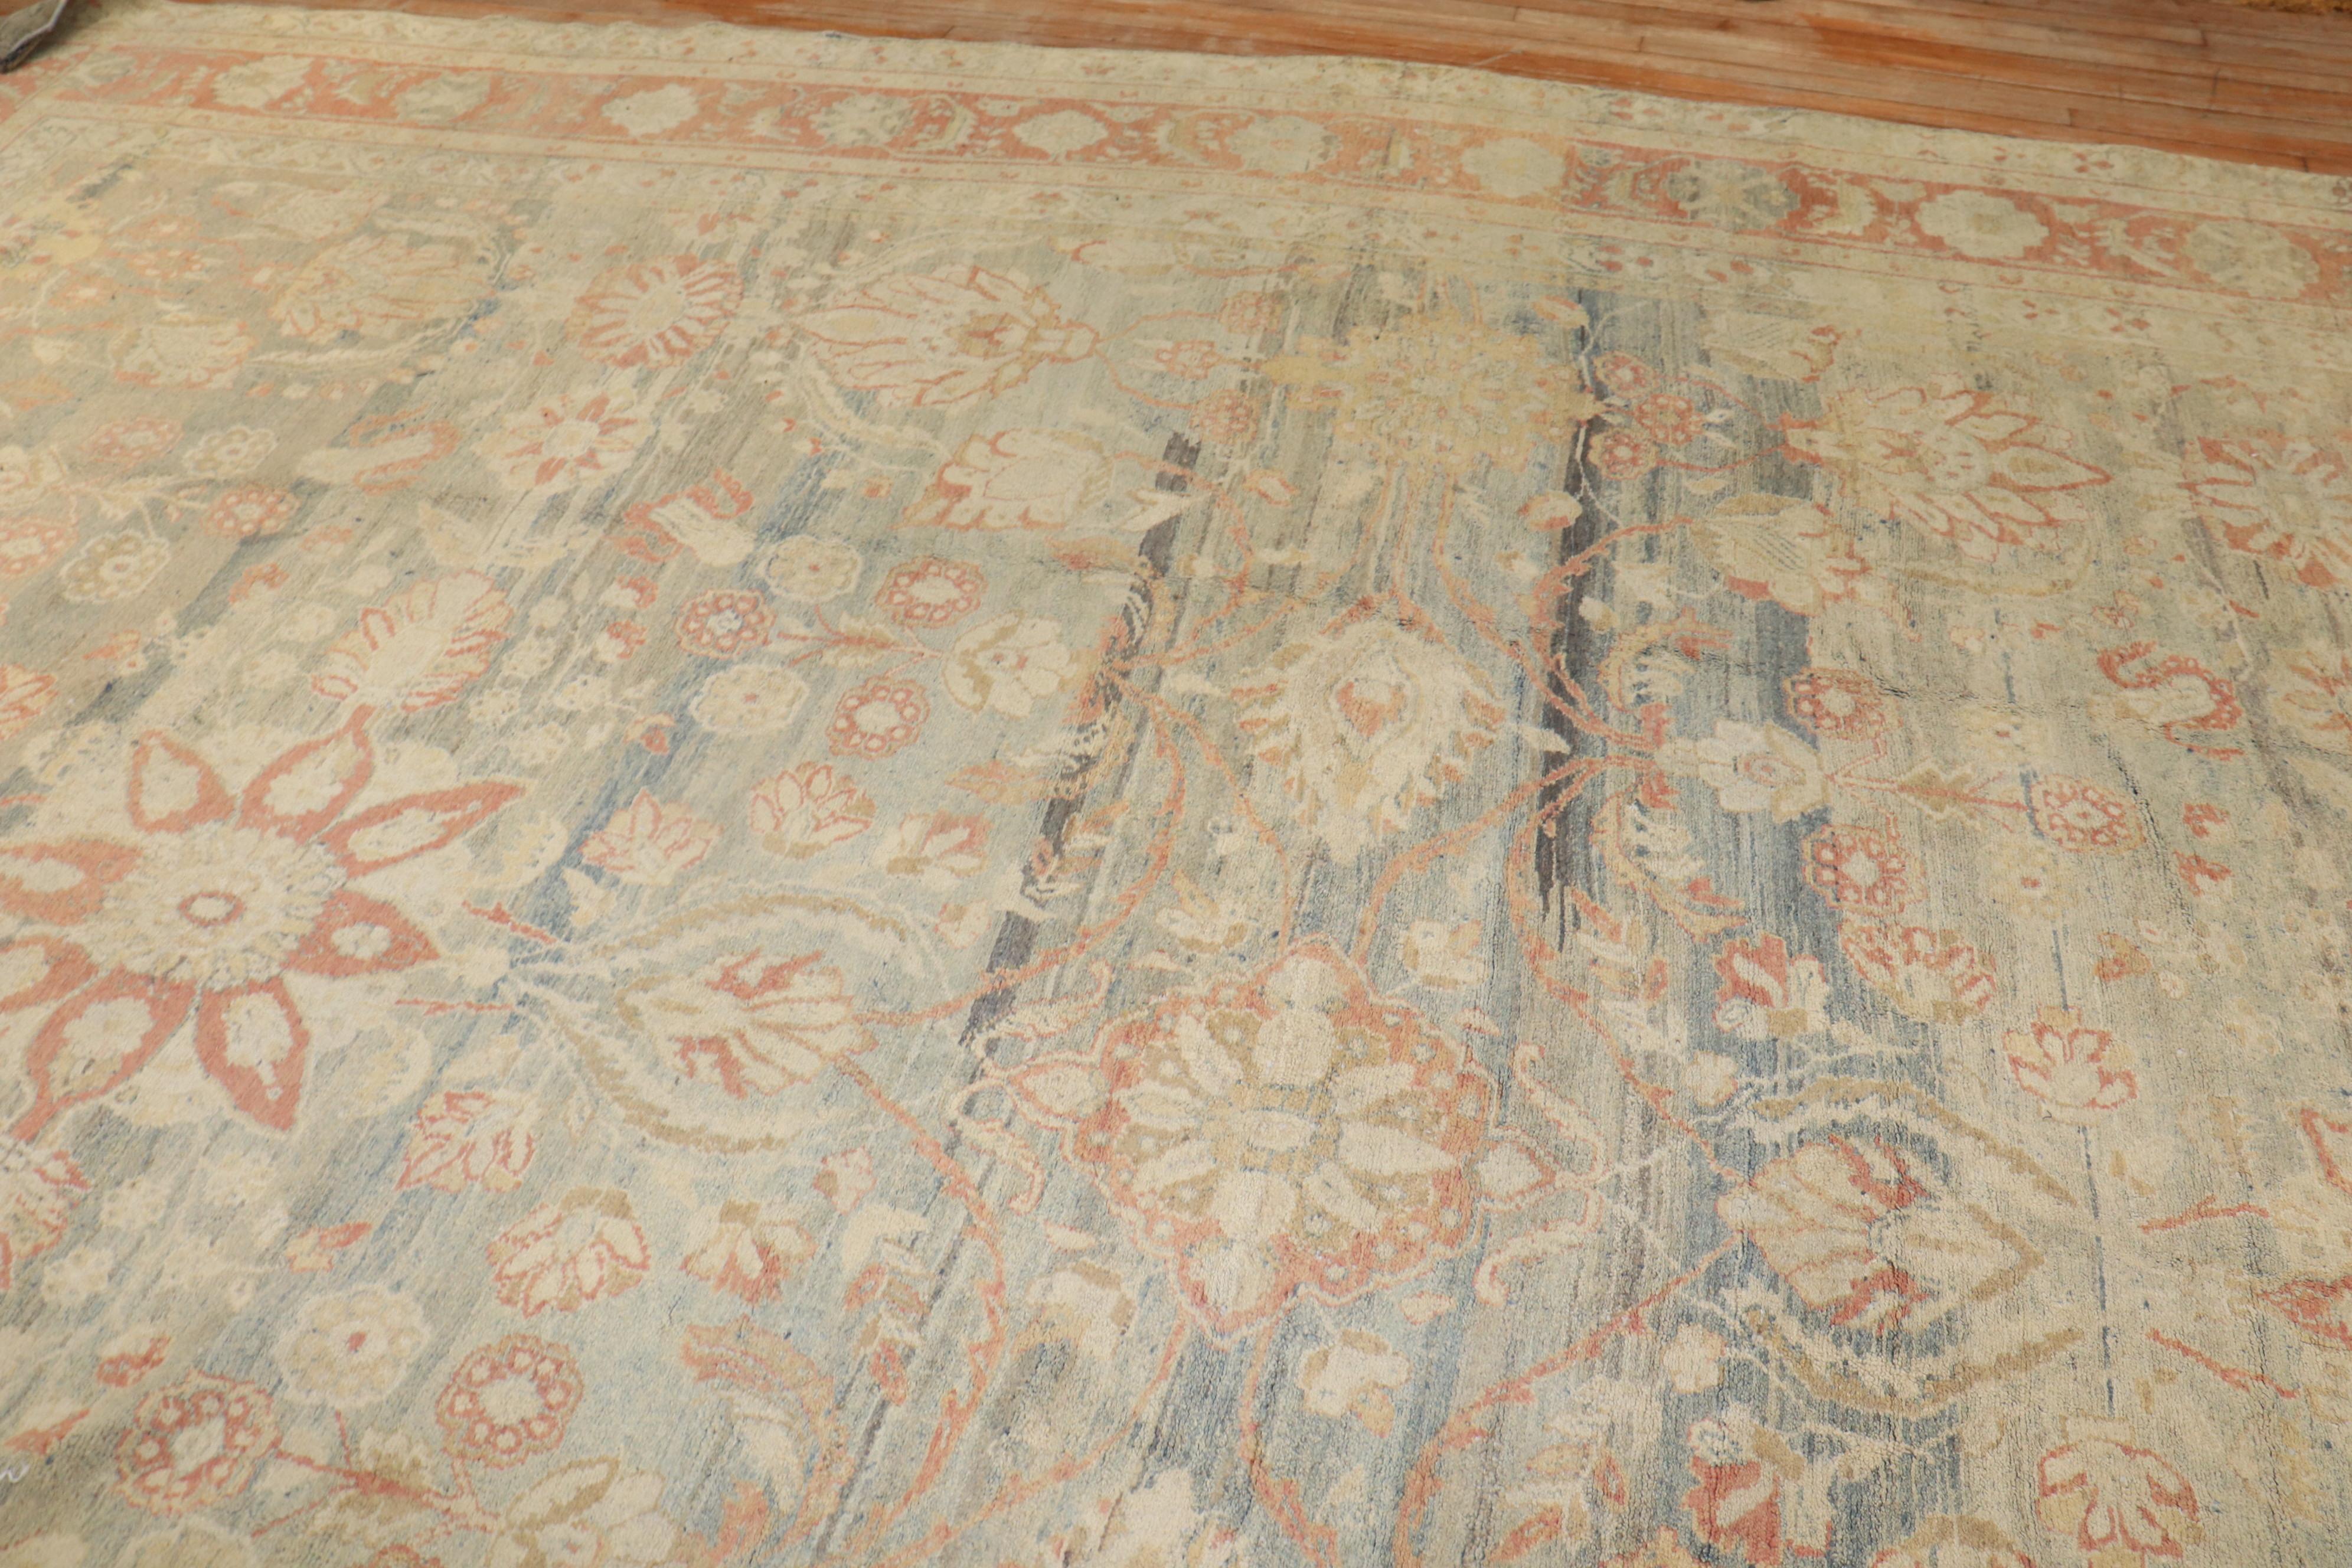 An early 20th century Persian Bibikabad oversize rug with an elegant allover design in muted colors

Measures: 12' x 16'6